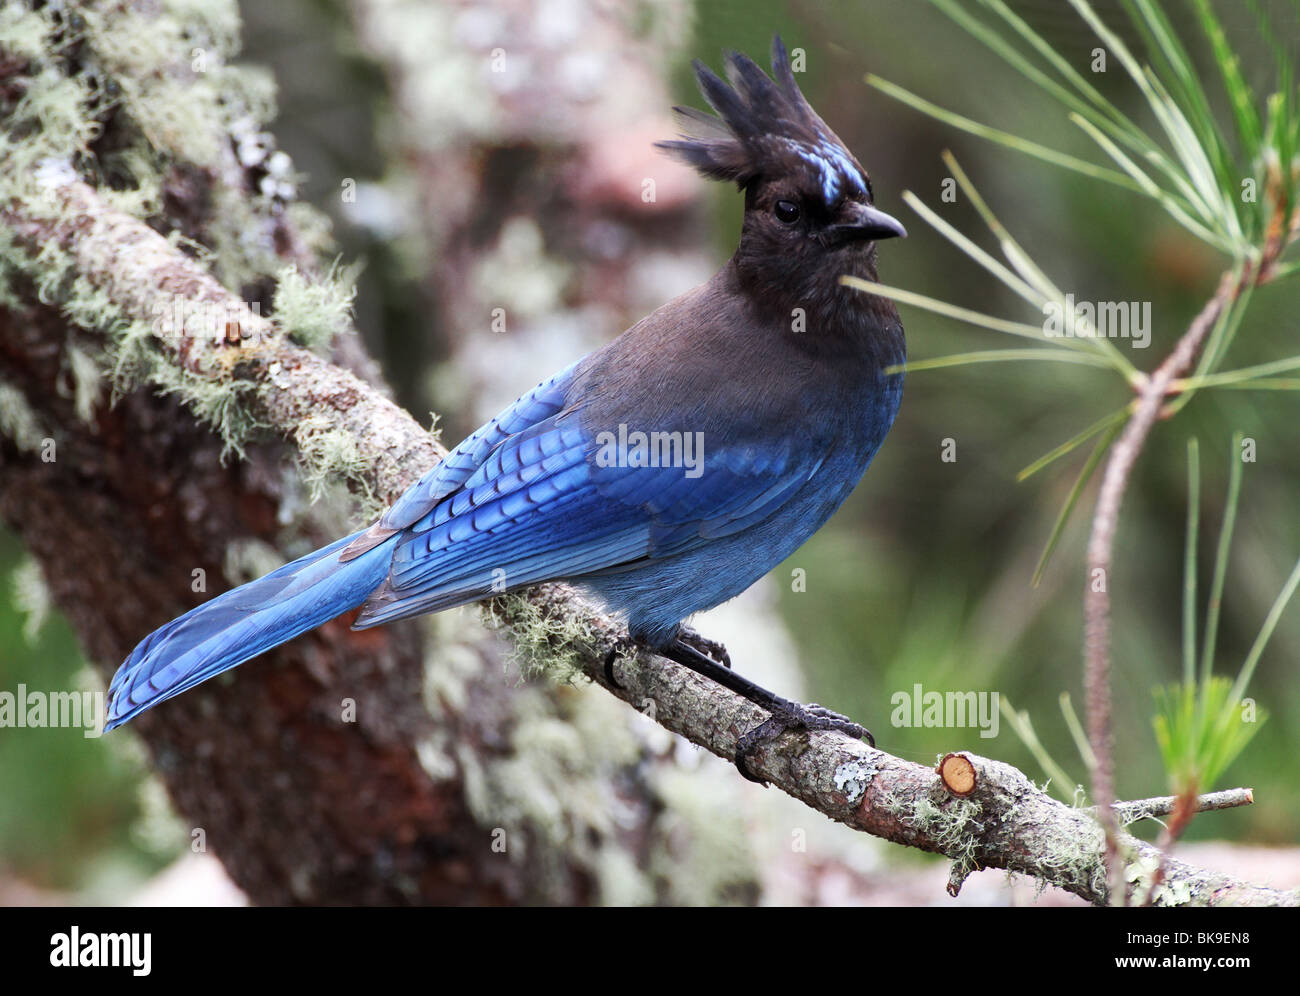 B-969D, STELLER'S JAY WITH CREST UP Stock Photo